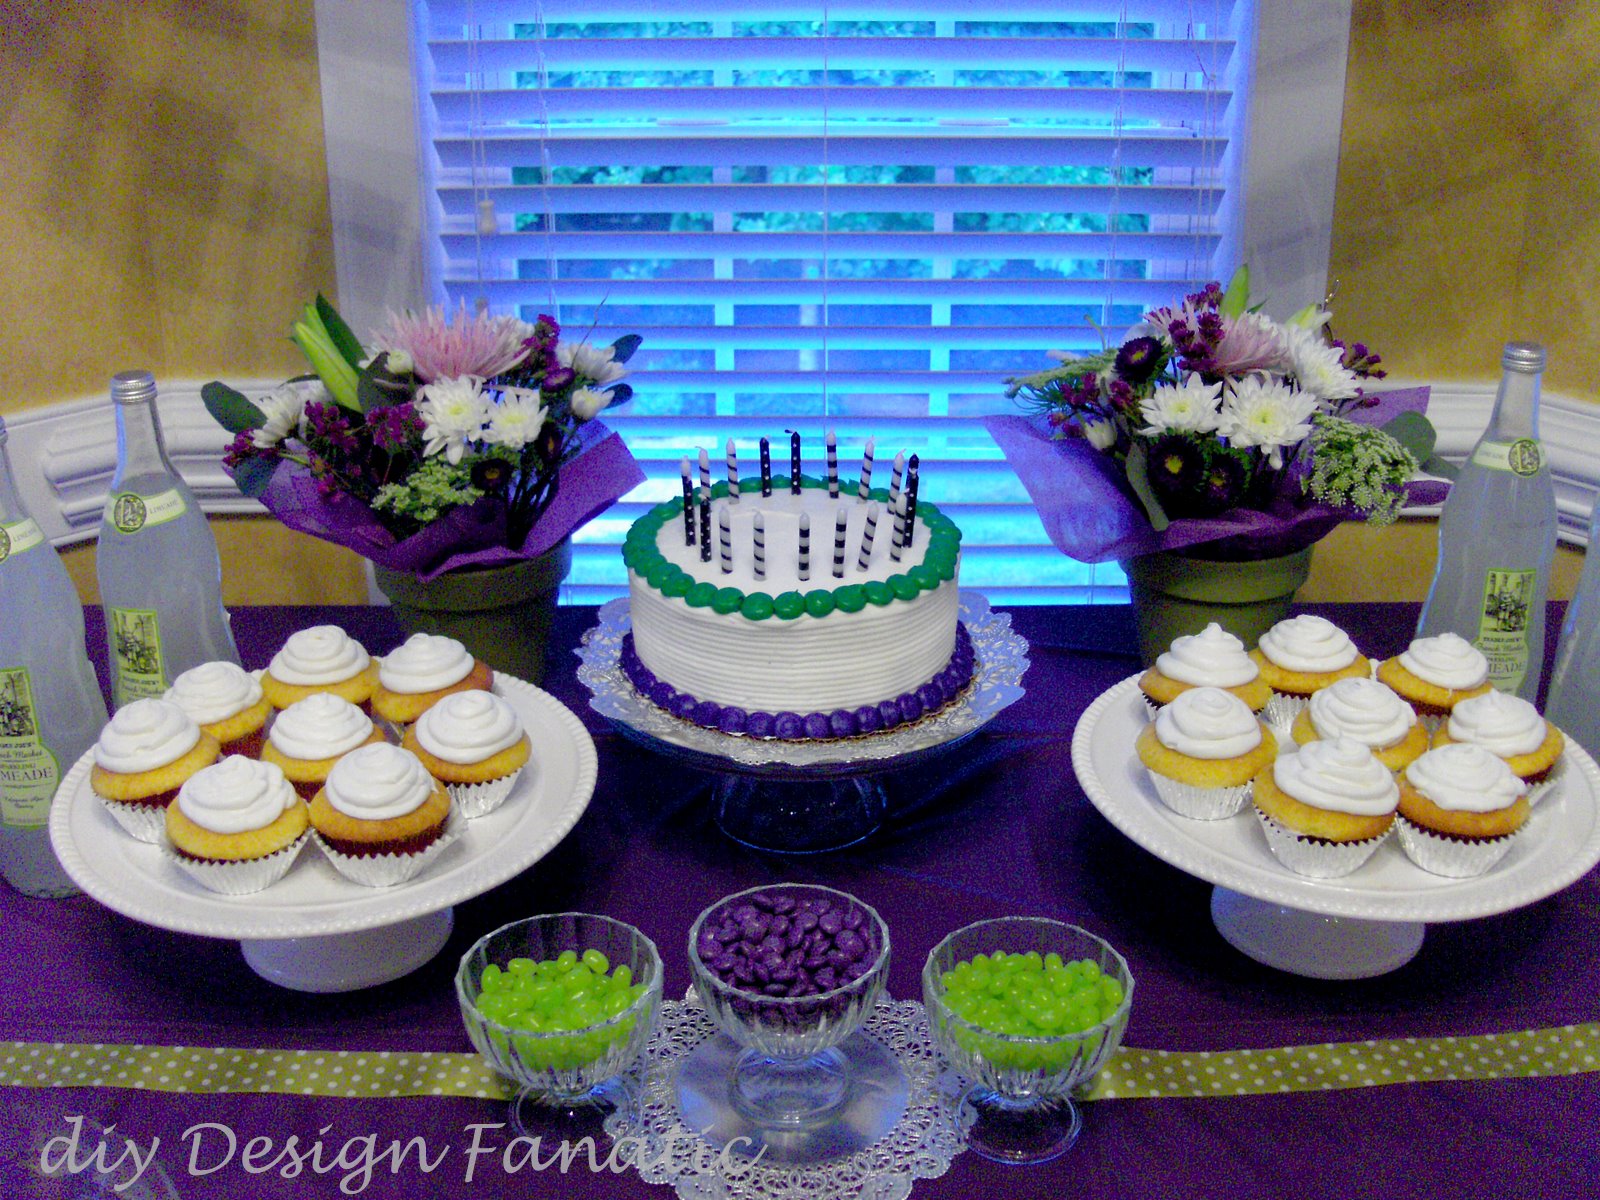 M&M's Birthday Sweet Table for a - Dahlia Sweet Table